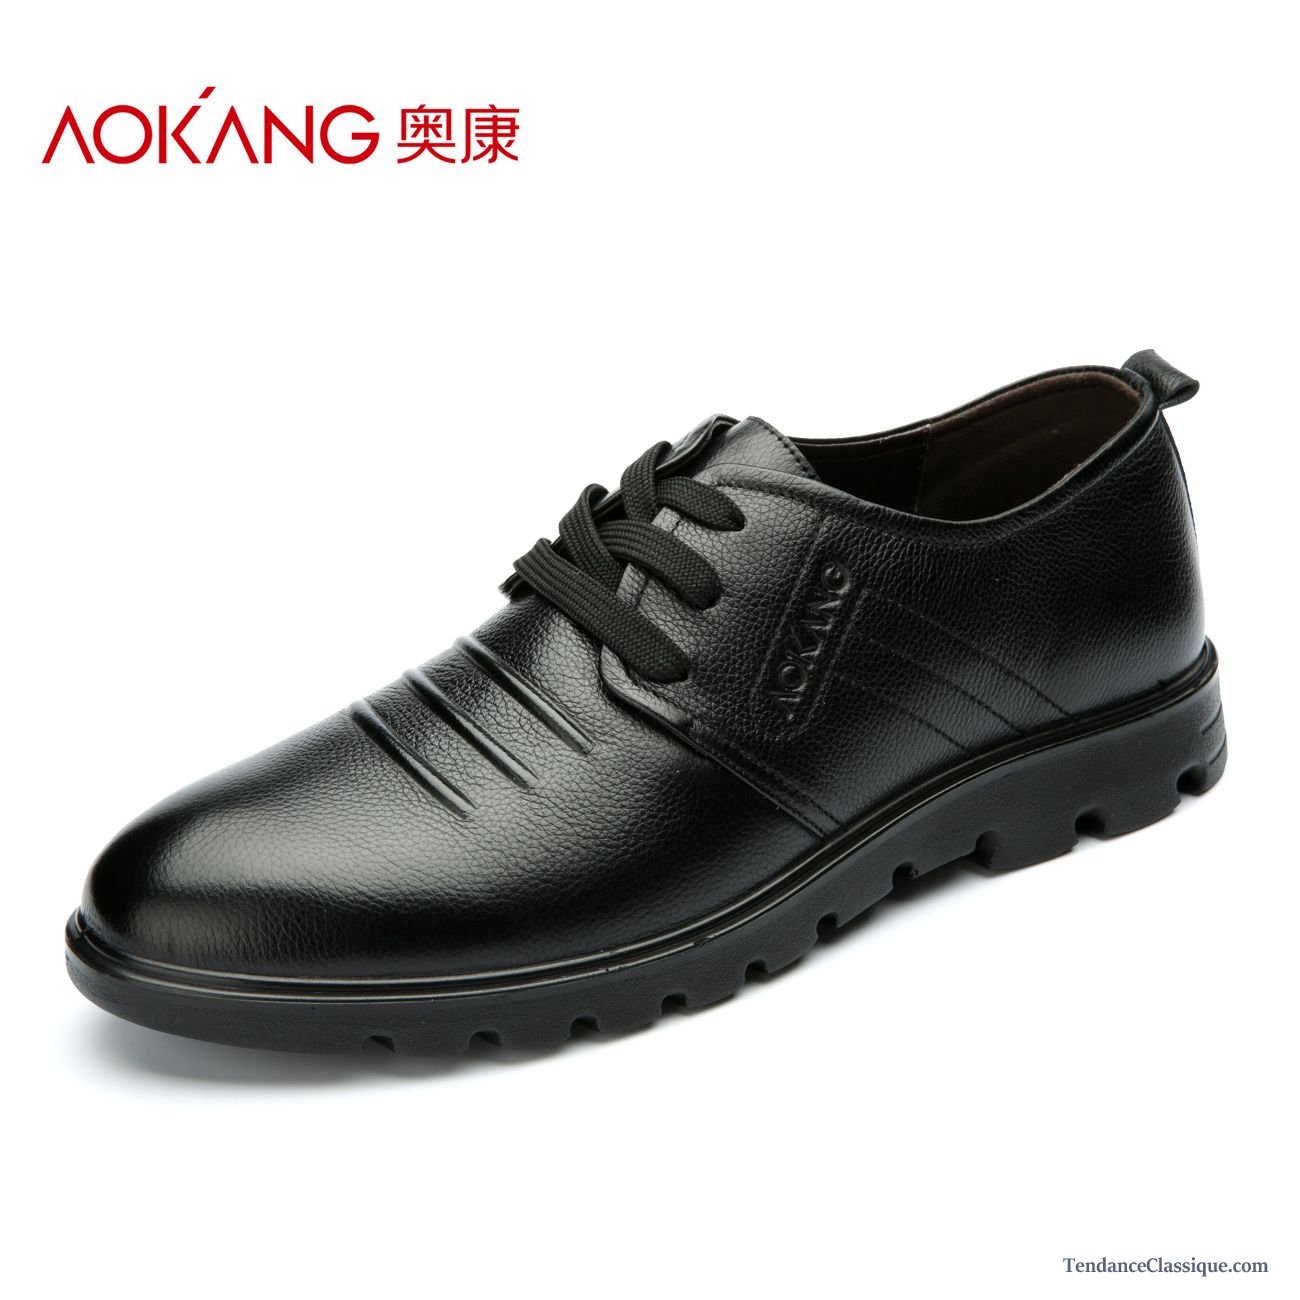 Chaussures Imitation Cuir Homme, Soldes Bottines Homme Cuir Pas Cher